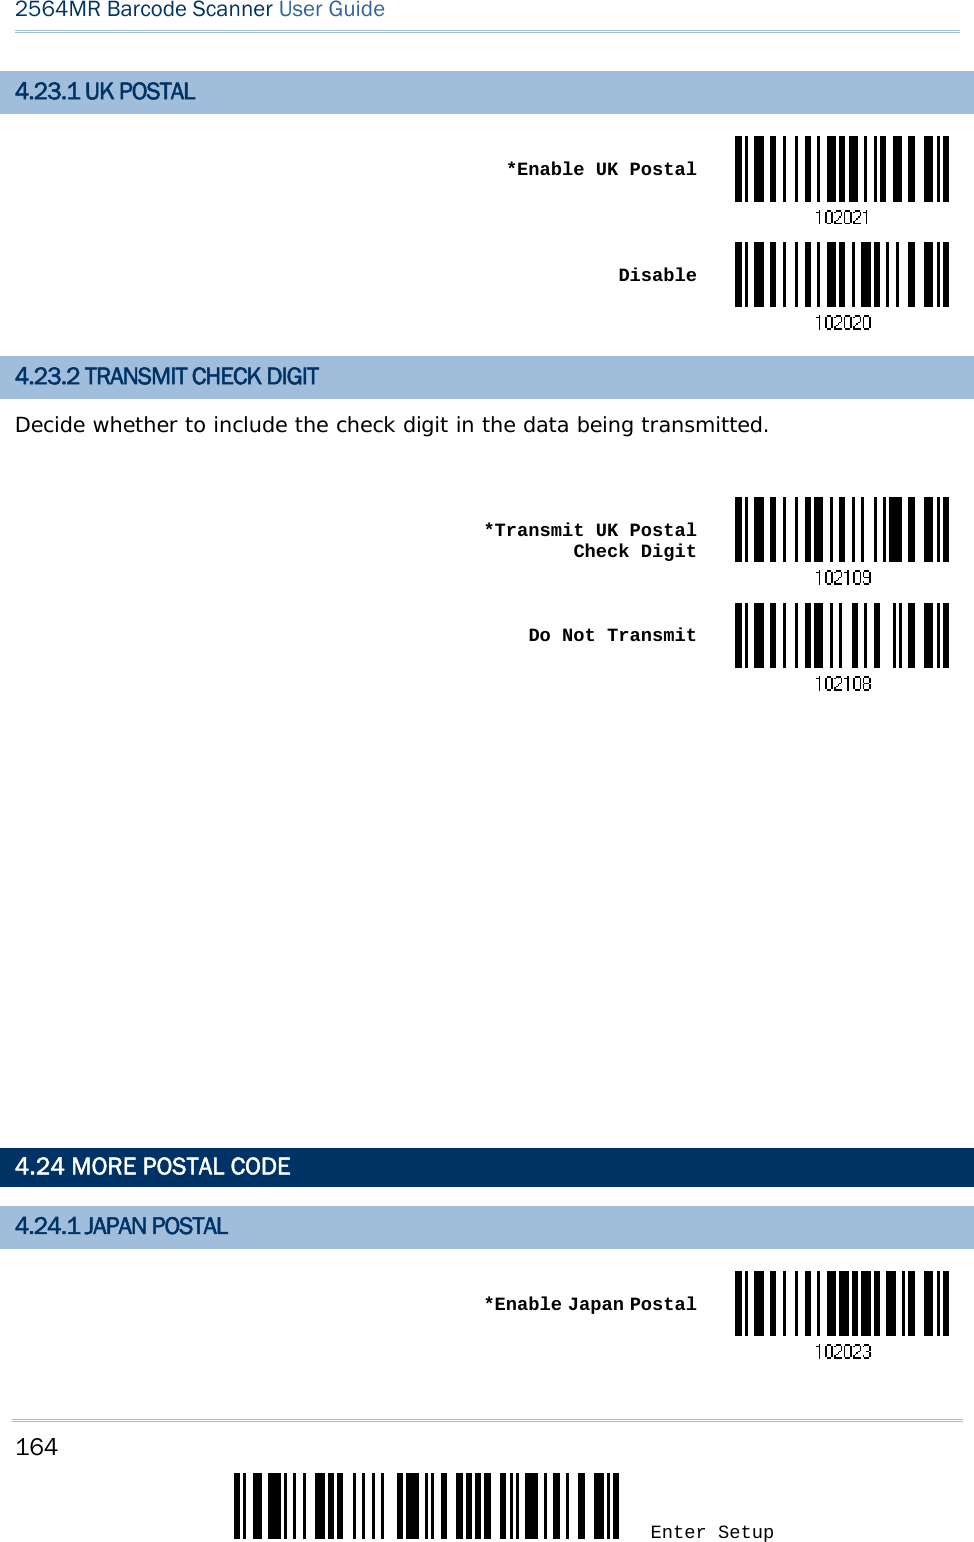 164 Enter Setup 2564MR Barcode Scanner User Guide  4.23.1 UK POSTAL  *Enable UK Postal Disable4.23.2 TRANSMIT CHECK DIGIT Decide whether to include the check digit in the data being transmitted.   *Transmit UK Postal Check Digit Do Not Transmit             4.24 MORE POSTAL CODE 4.24.1 JAPAN POSTAL  *Enable Japan Postal